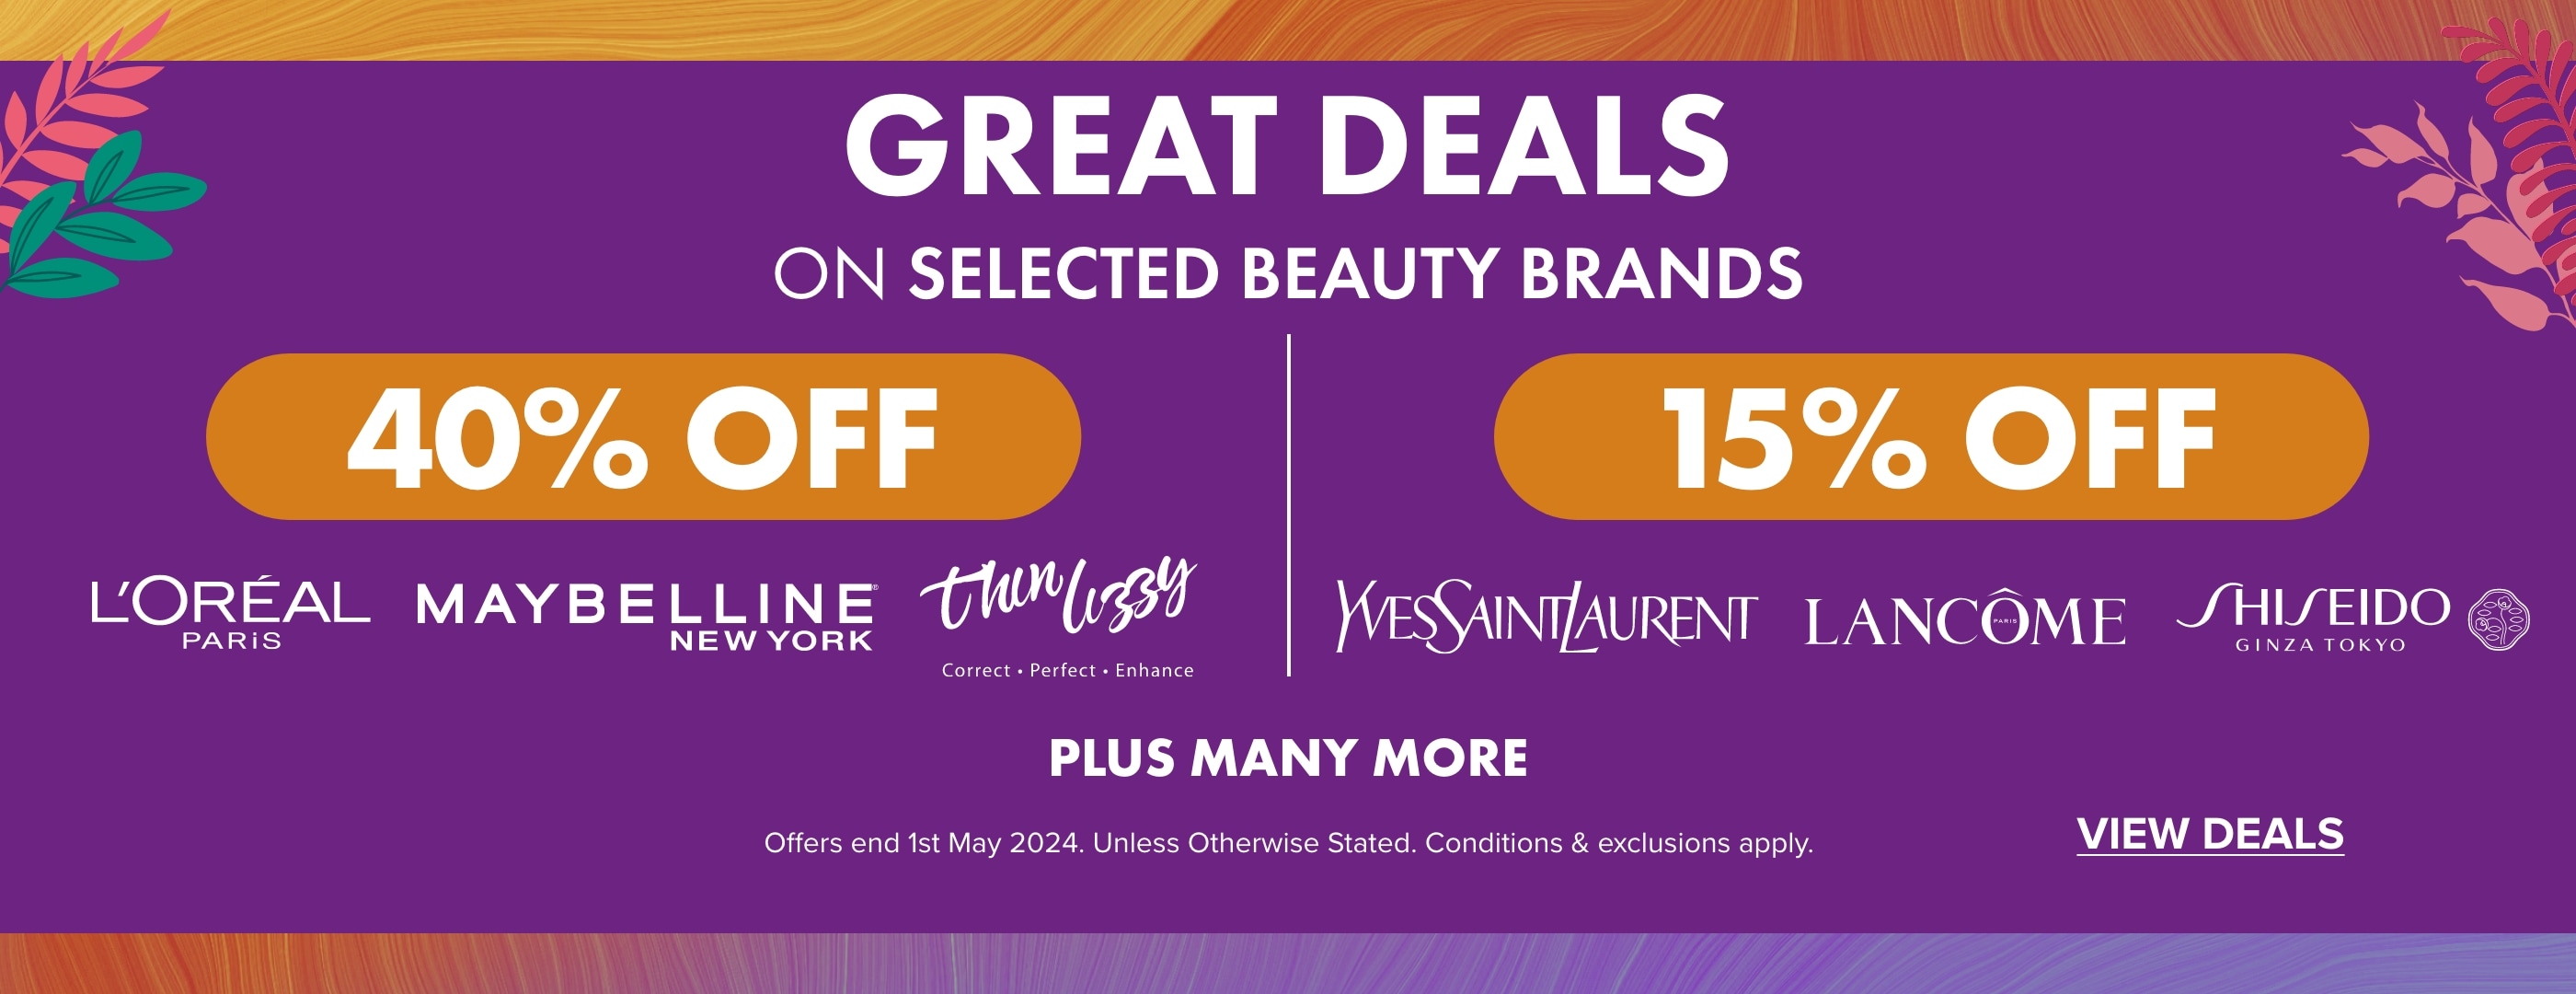 Great Deals on Selected Beauty Brands On Now!